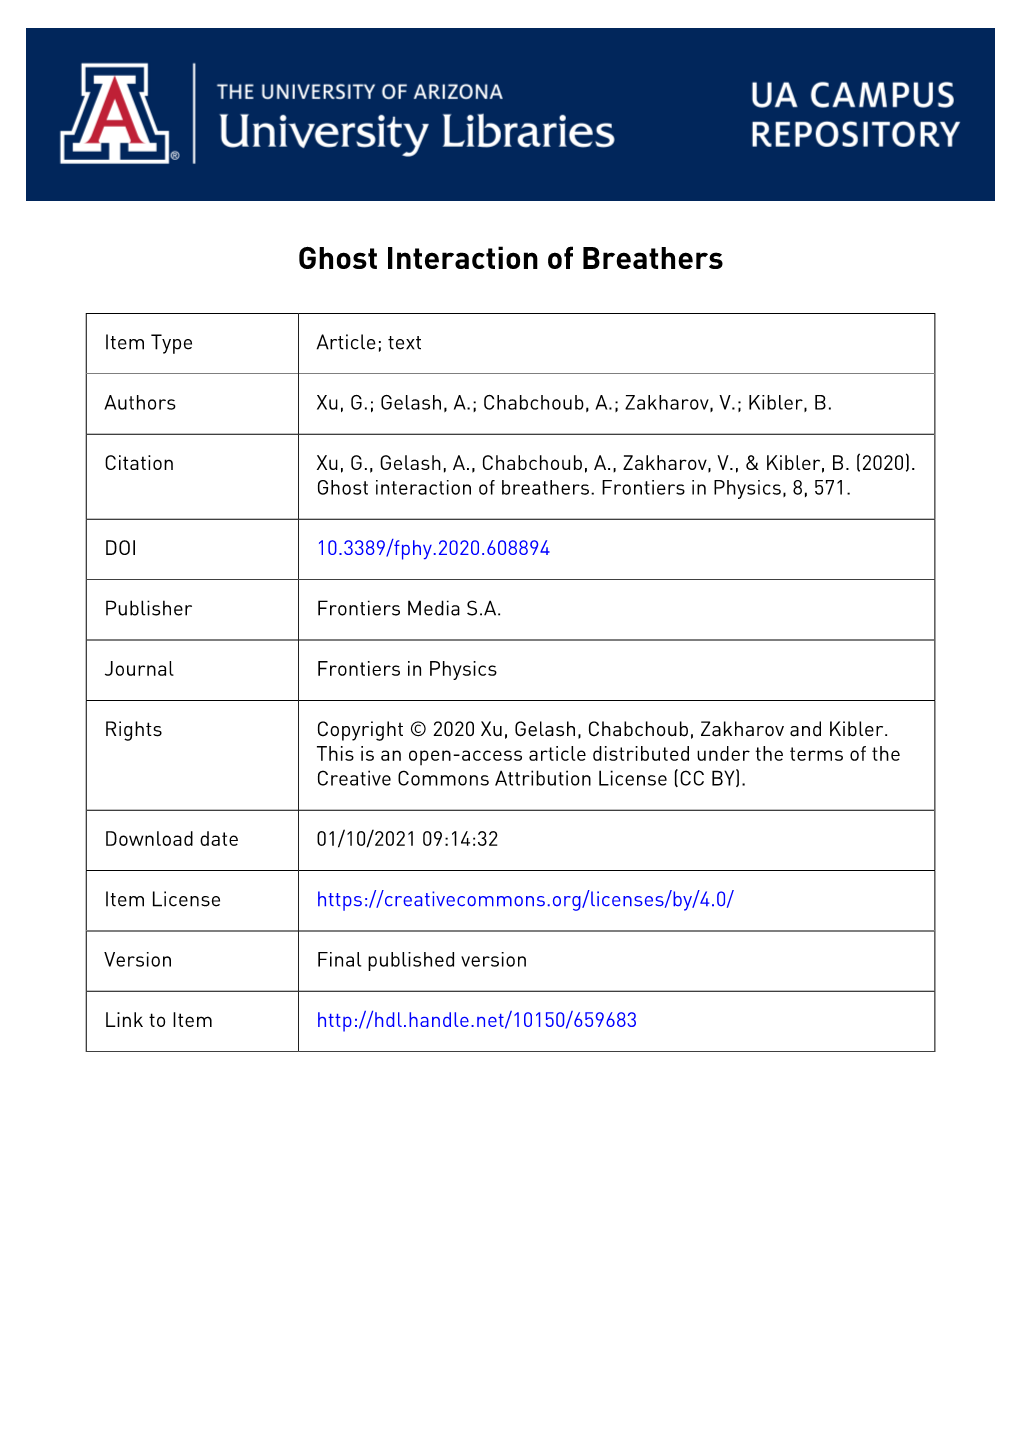 Ghost Interaction of Breathers